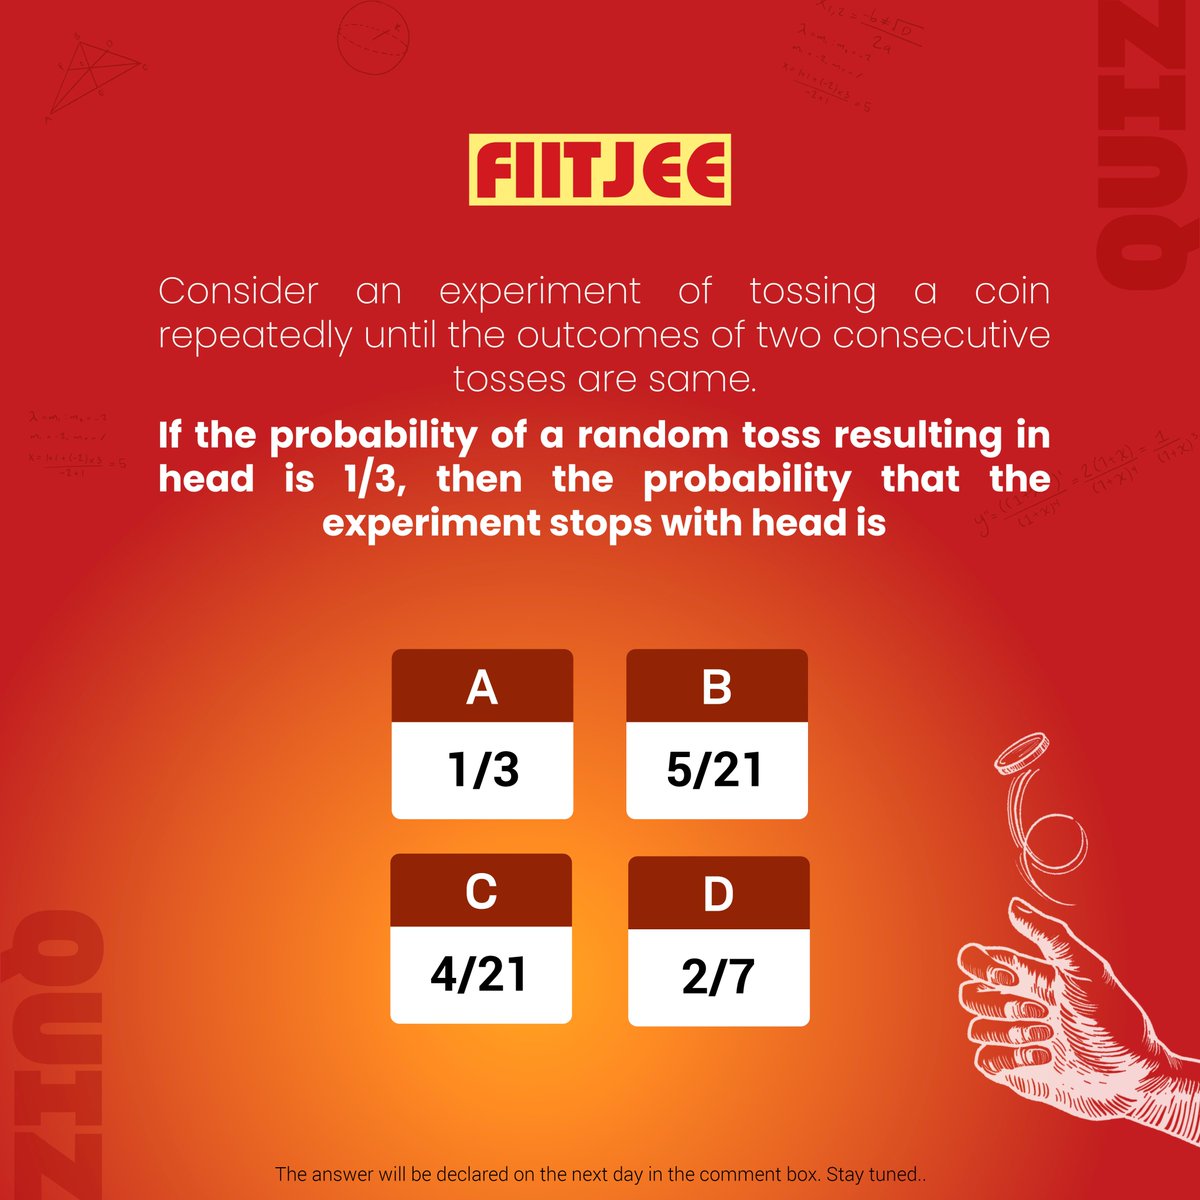 Let's try to solve this aptitude puzzle. 

The answer will be declared on the next day in the comment box. Stay Tuned. Explore more aptitude puzzles by downloading FIITJEE's past test sample papers.

Download now: bit.ly/44BVg9I

#Aptitude #Quiz #QuizChallenge #Puzzle